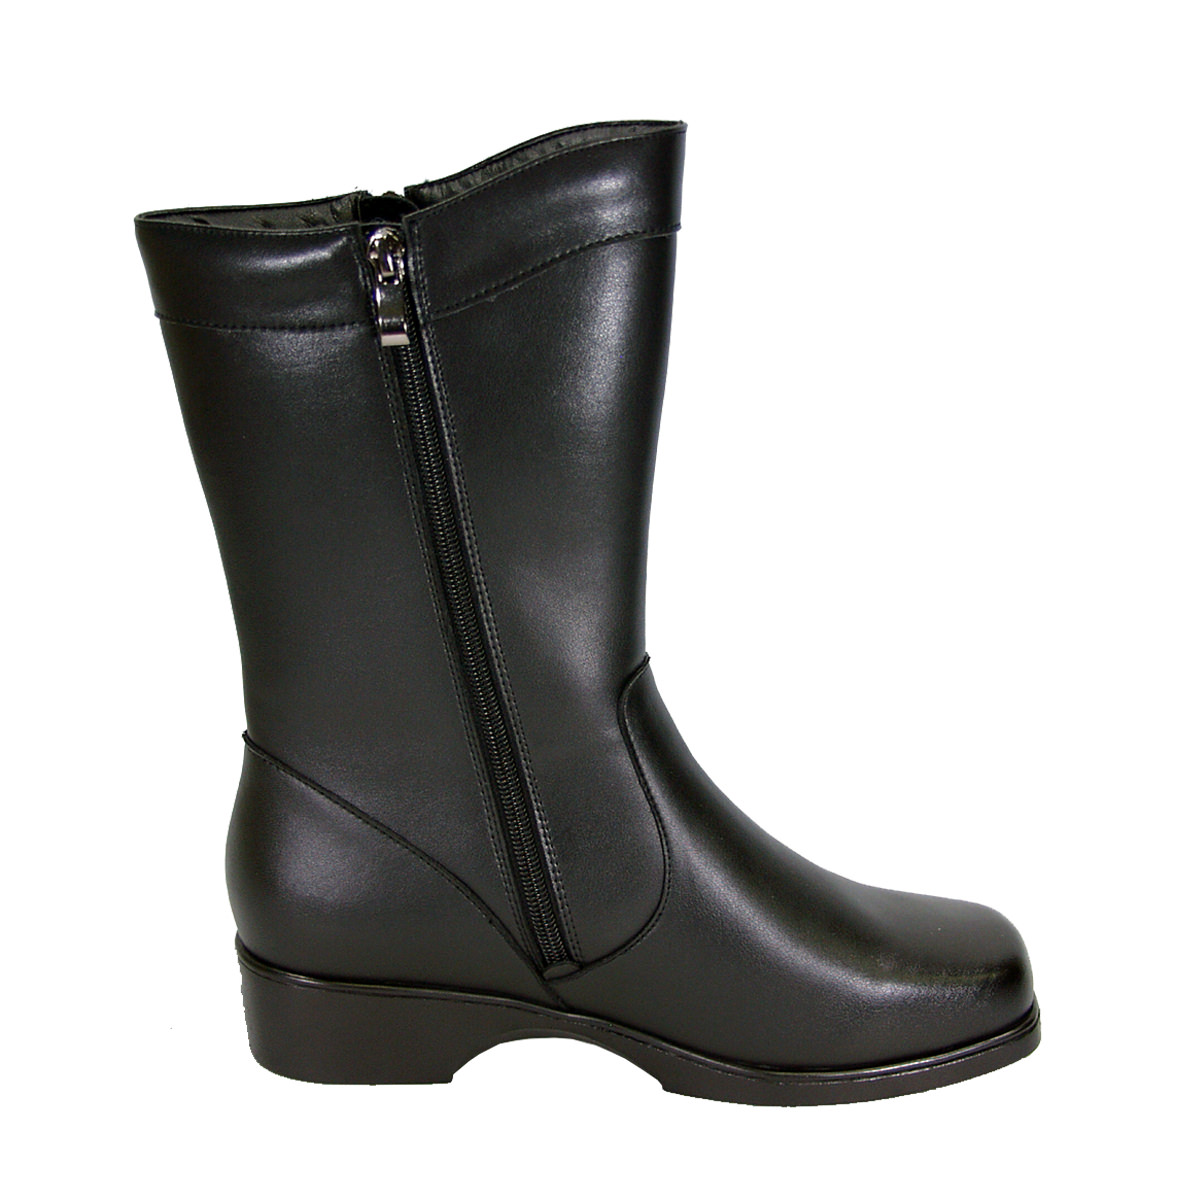 PEERAGE Athena Women Wide Width Wide Calf Casual Leather Boot BLACK 12 - image 3 of 7